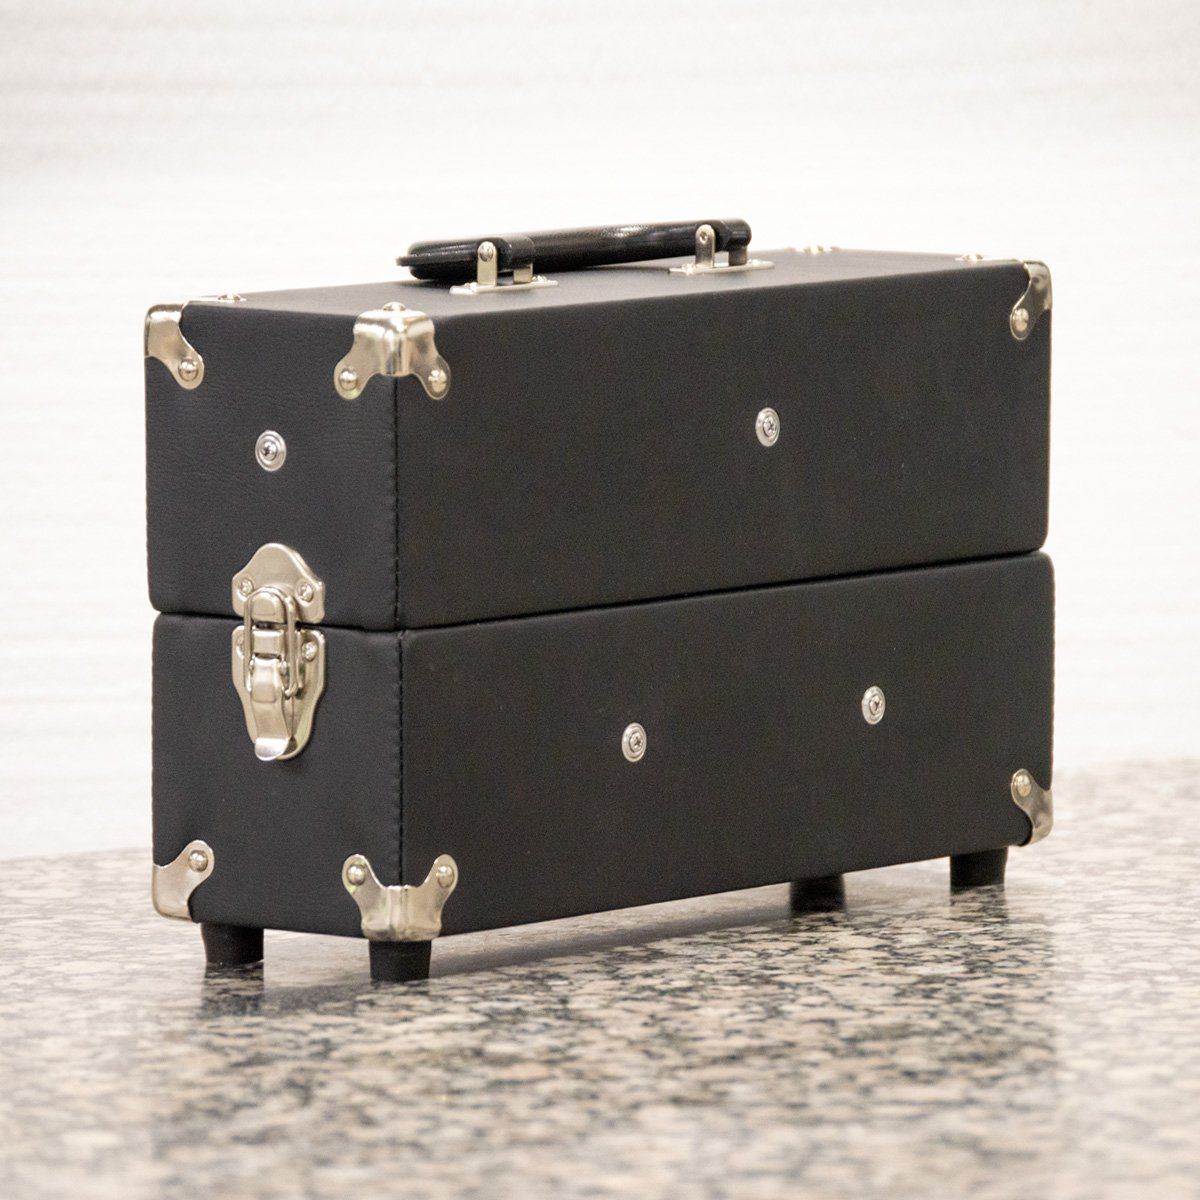 Black case with handle on top and metal clasps